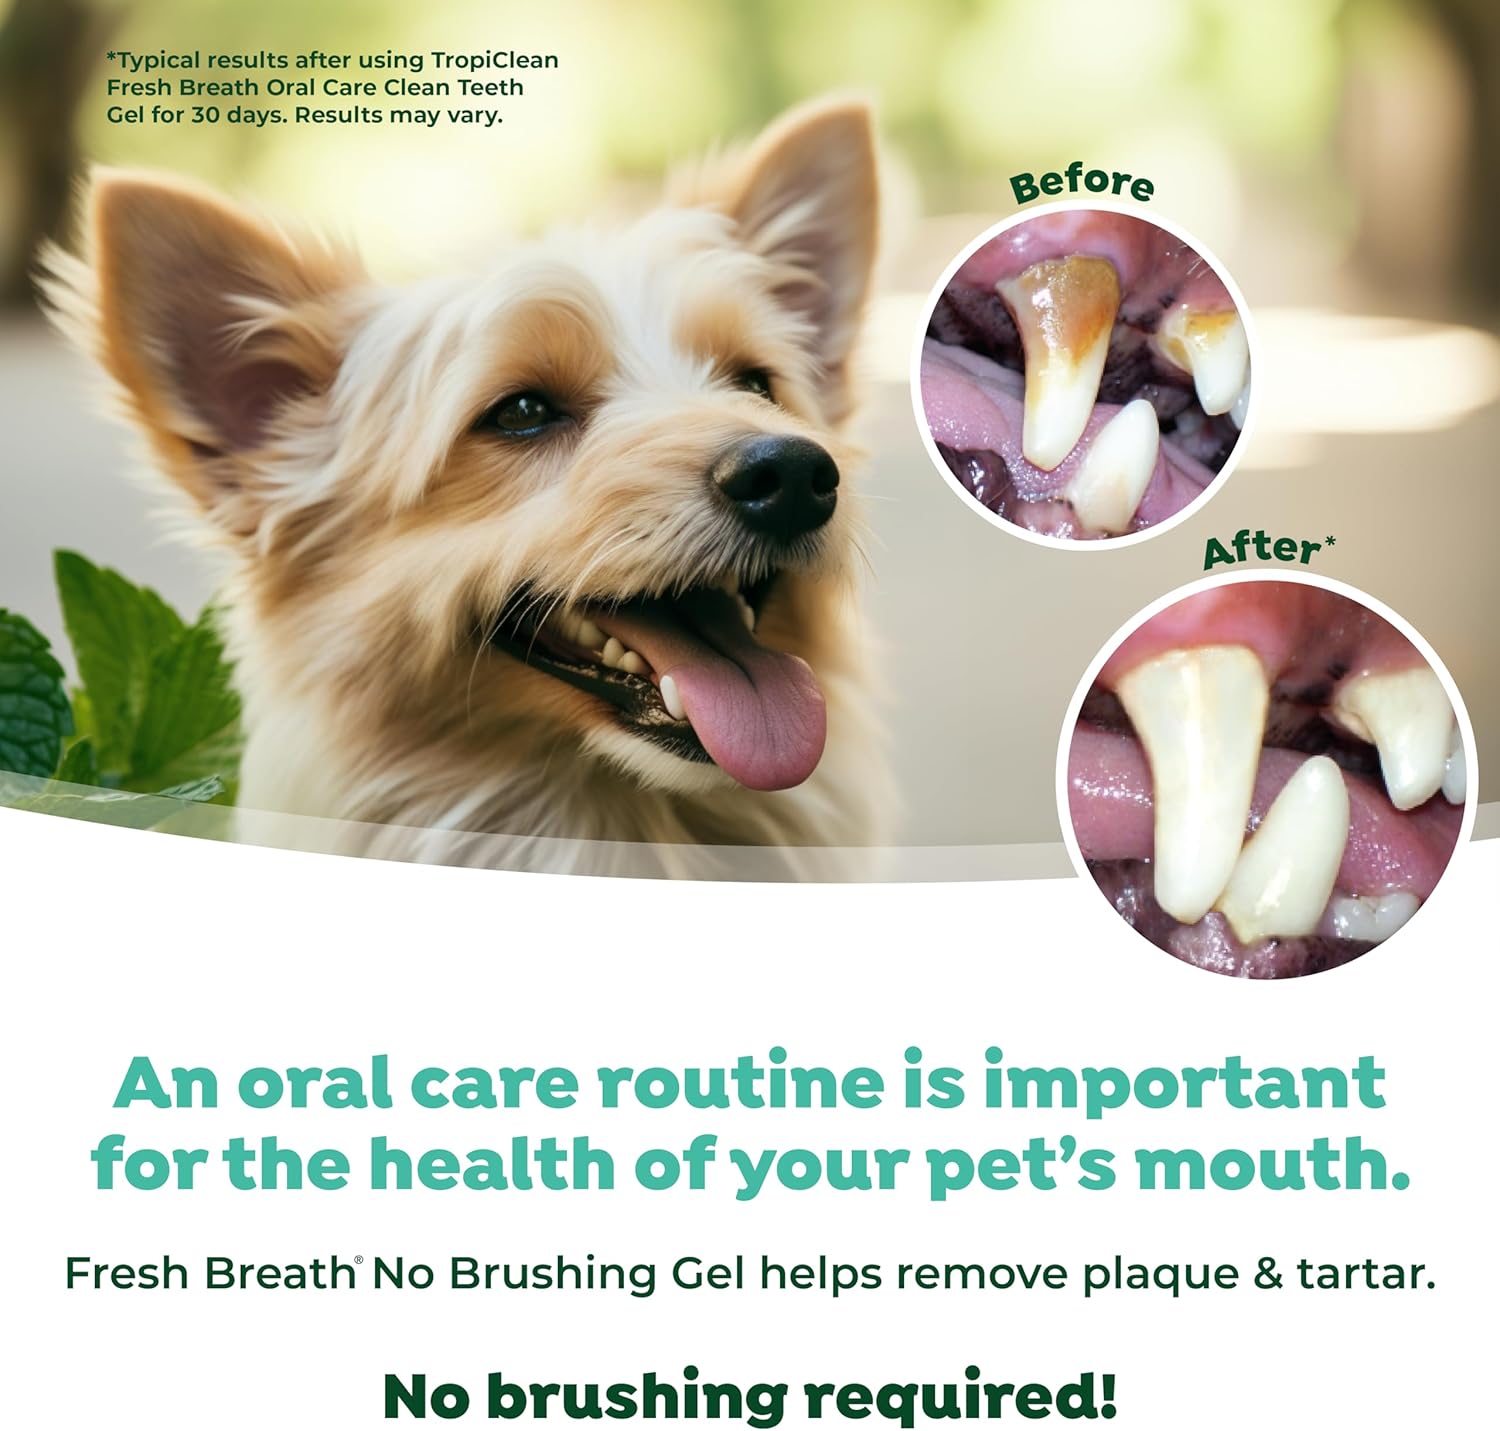 TropiClean Fresh Breath Puppy Teeth Cleaning Gel - No Brushing Dental Care - Breath Freshener Oral Care - Complete Puppy Teeth Cleaning Solution - Helps Remove Plaque & Tartar, For Puppies, 59ml :Health & Personal Care